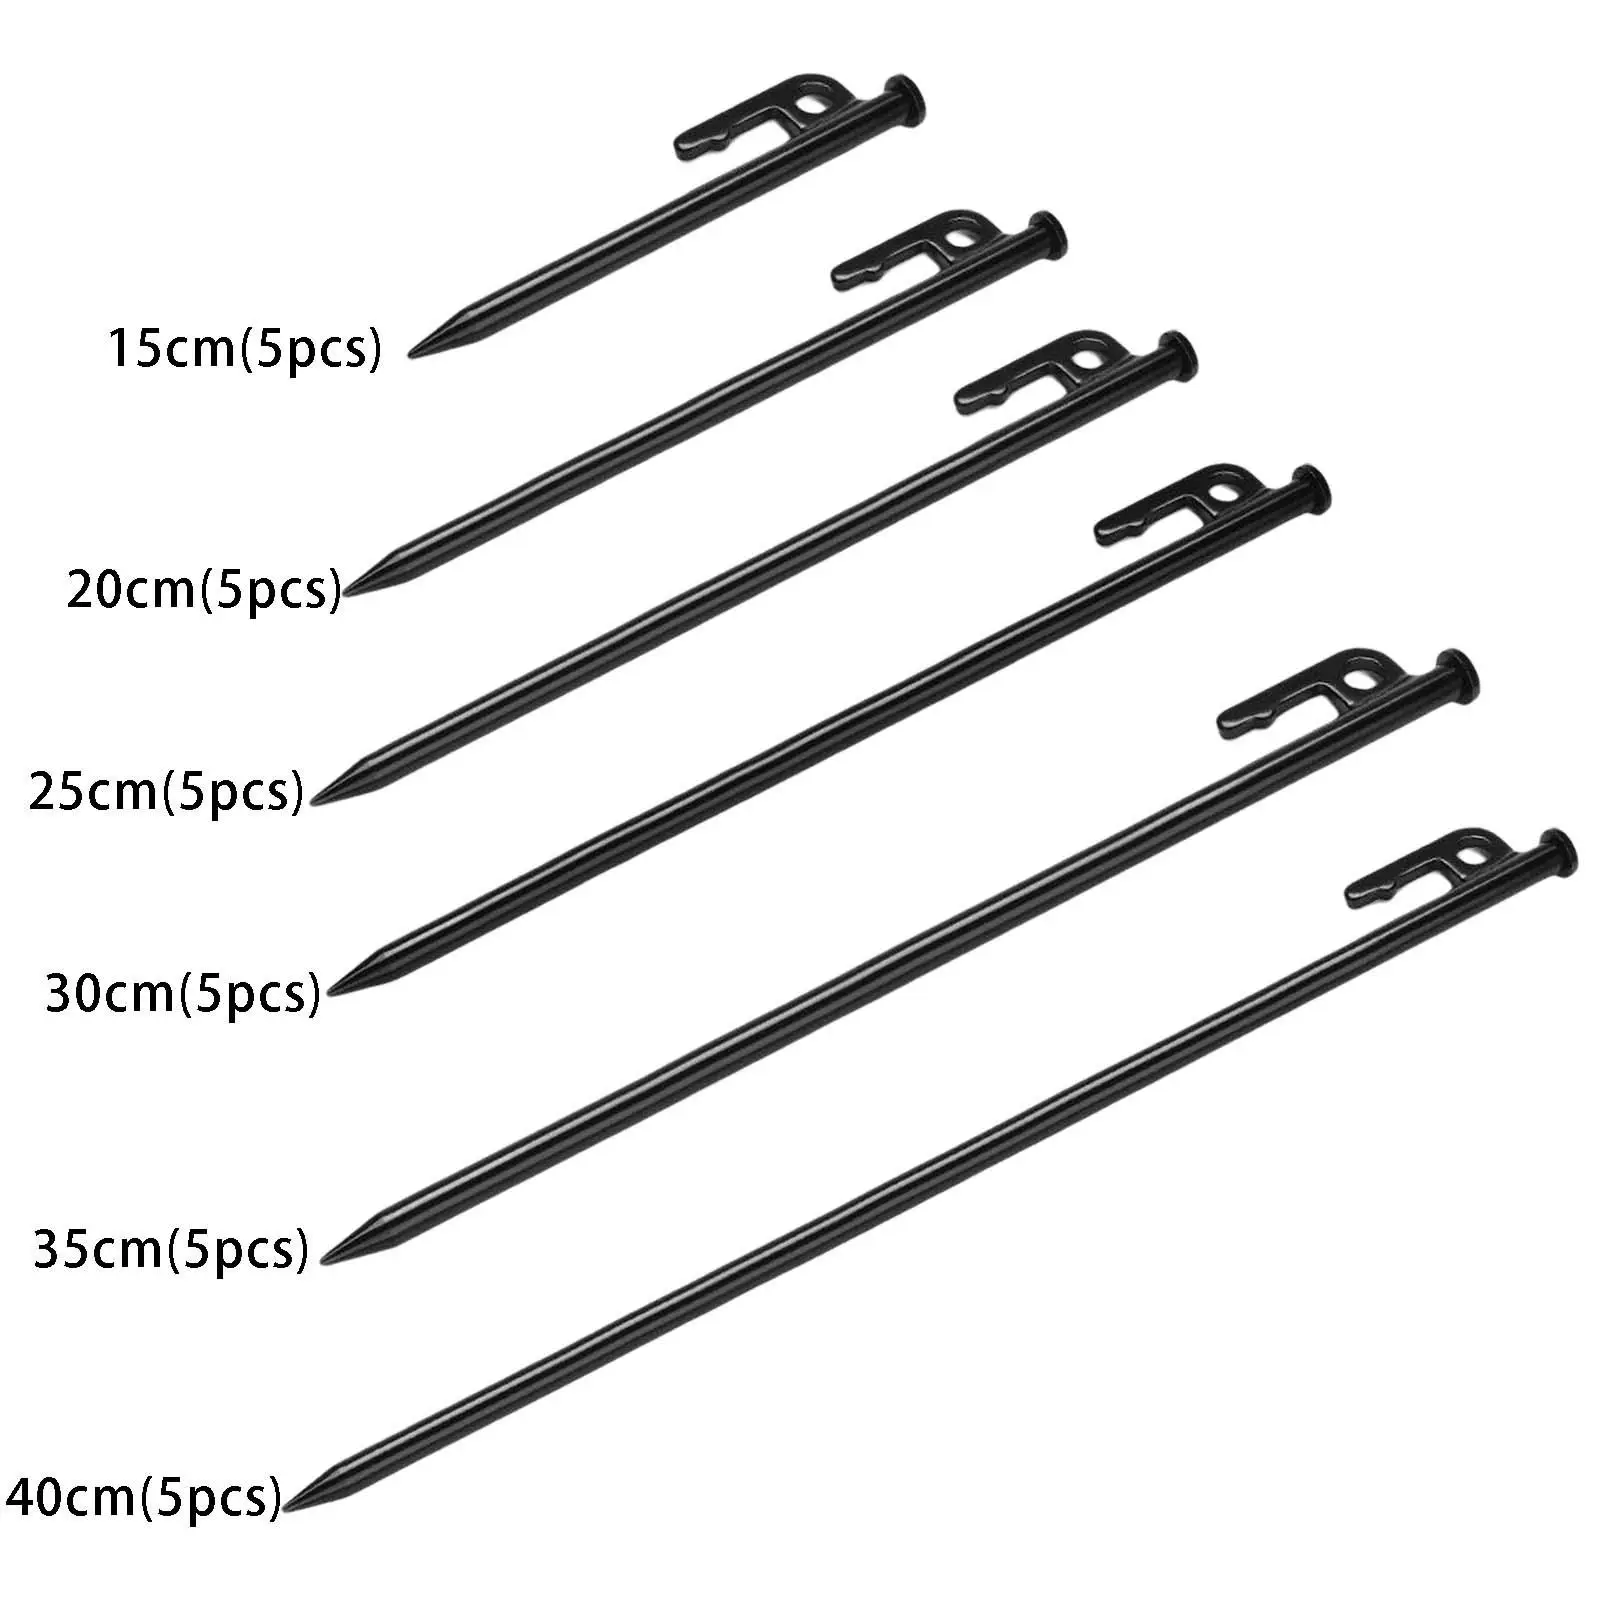 5x Heavy Duty Tent Pegs Steel Tent Accessories Camping Stakes for Outdoor